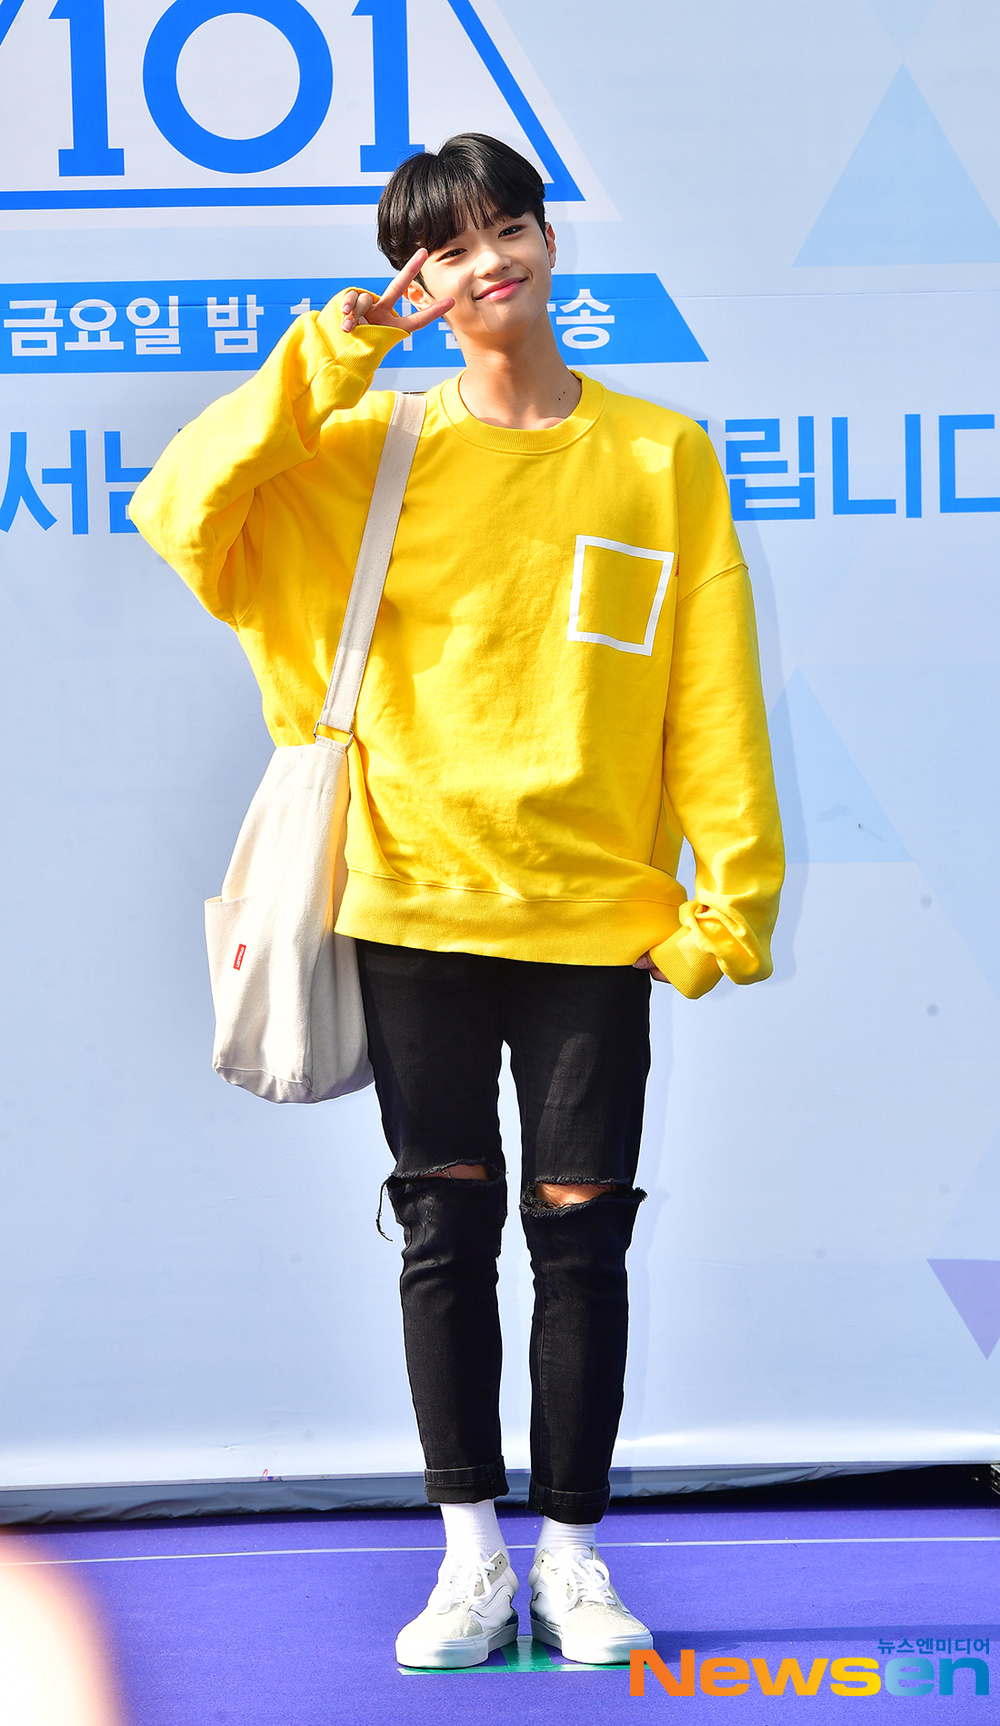 Son Dong-pyo, a former project group X1, celebrated his 19th birthday.Son Dong-pyo was born on September 9, 2002 in Snow crab, North Gyeongsang Province.East East, Big Tube tickets.Son Dong-pyo, who means who is the main character everywhere, appeared on Mnet Produce X101 which was broadcast last year after living as a DSP media trainee and made his debut as a project boy group X1 with the final 6th place and 11 people list.Son Dong-pyo, who has a lot of talent and dance skills to win the first prize in the evaluation at the end of the month in a week after joining his agency, is loved by fans with his thick lips, fairy-like expressions, fresh visuals and charm.Son Dong-pyo, who dreams of a singer-songwriter who can write, write, and produce.I want to make a R&B ballad for Son Dong-pyo, he said, and Ive been healing and comforting while listening to songs, and I think Id be really happy if my song could give such comfort to my fans.Lets take a picture of the charm of Passion Rich Son Dong-pyo, who went to dance academy for 5 hours from his hometown Snow crab to Daegu from the third grade of junior high school where he started dreaming of singer.Jung Yoo-jin